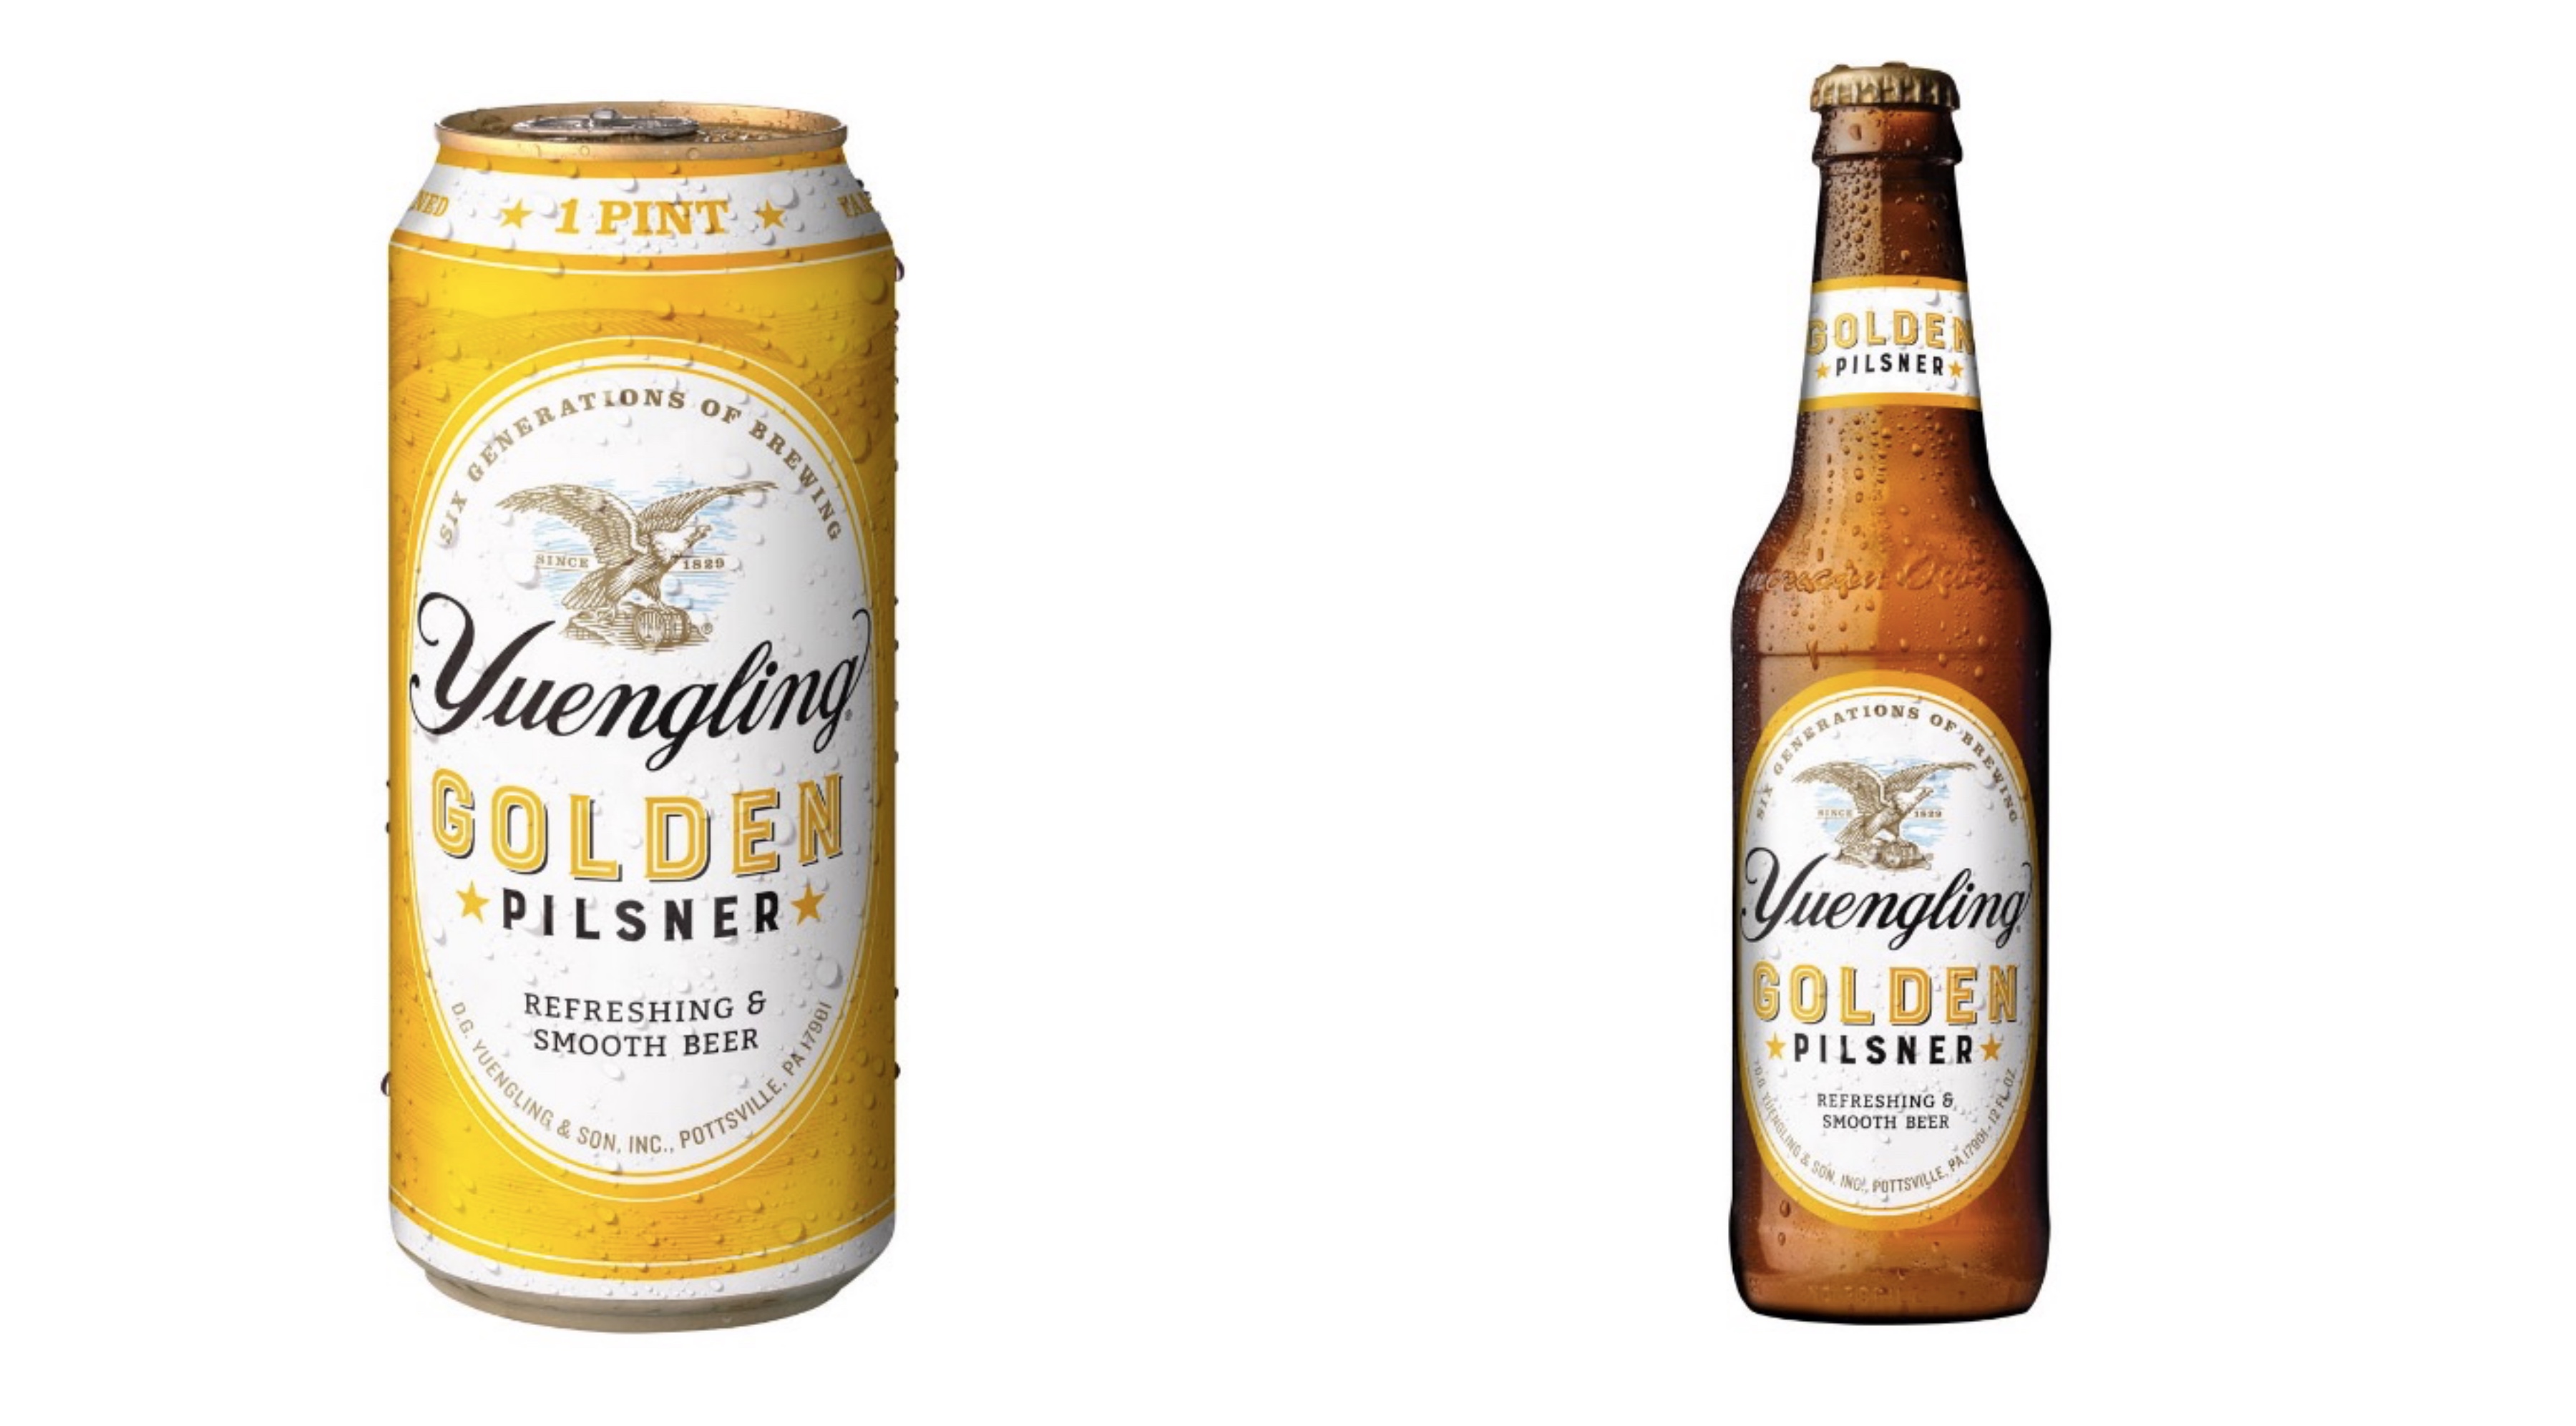 yuengling-is-releasing-their-first-new-year-round-beer-in-17-years-the